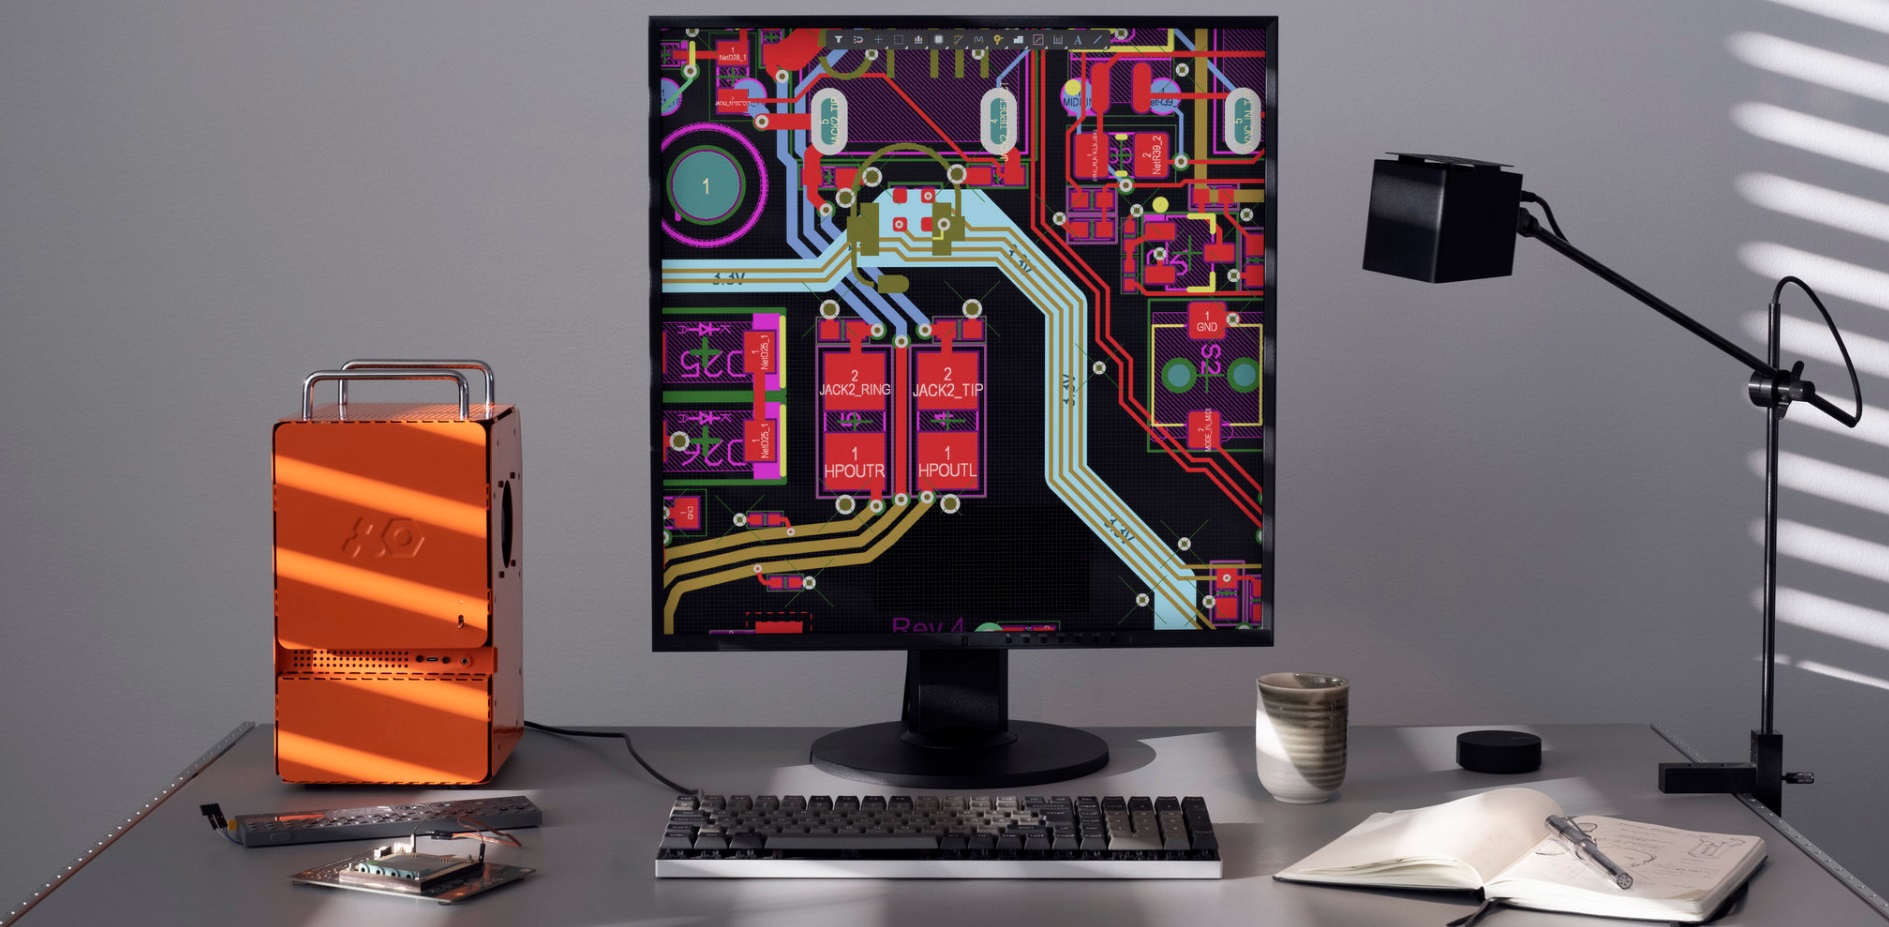 This Diy Mini-Itx Is Unlike Any Pc Case You'Ve Ever Seen | Digital Trends